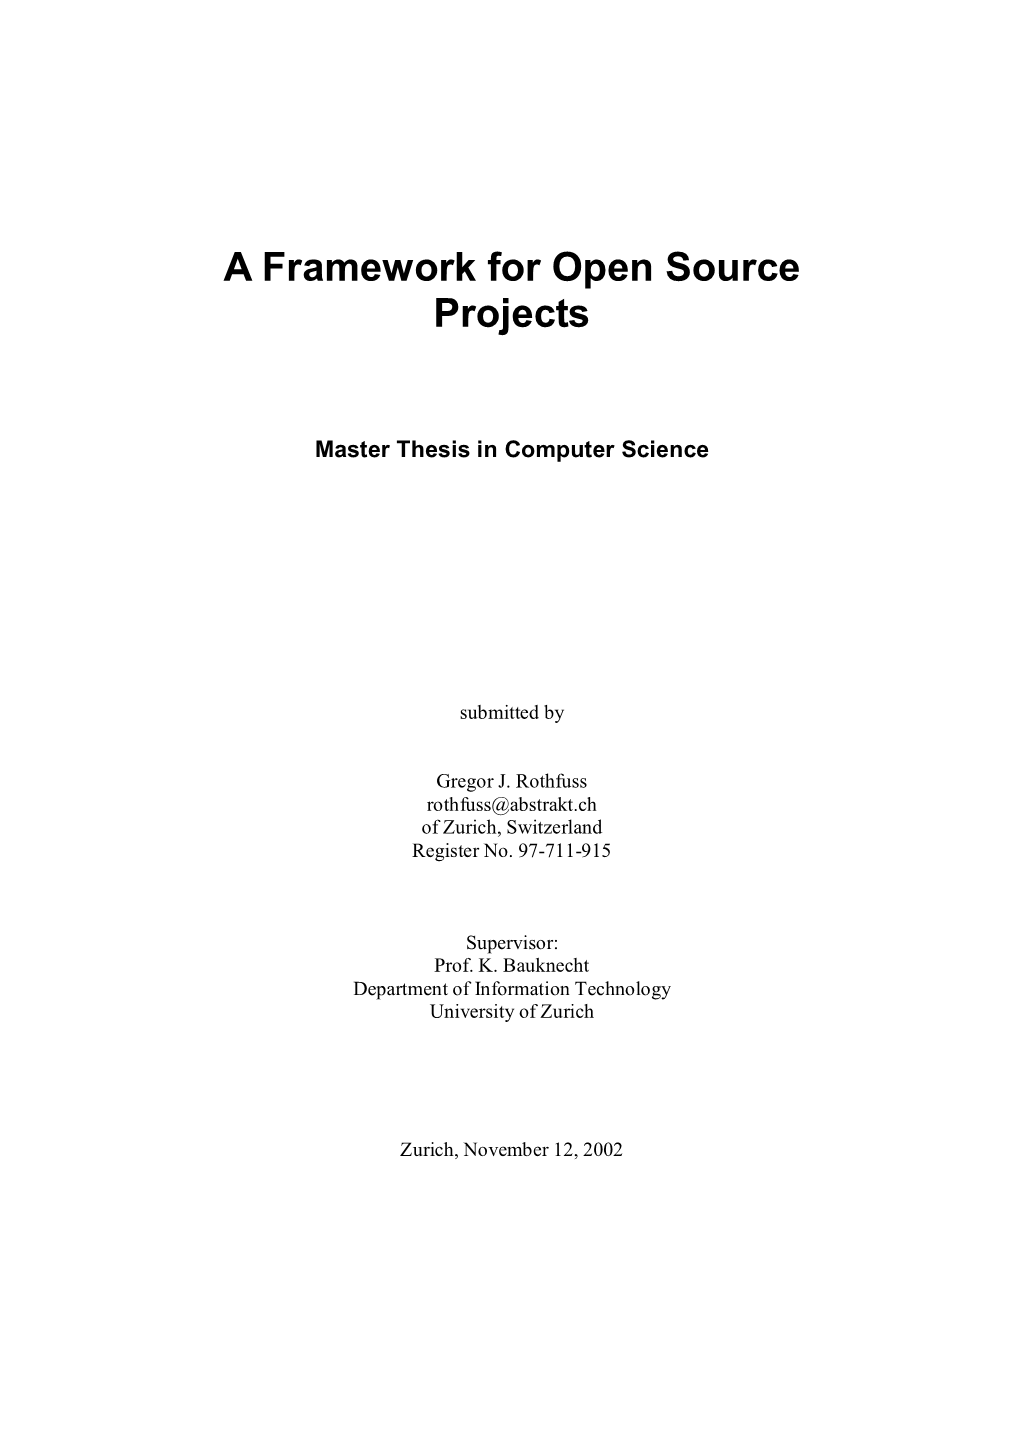 A Framework for Open Source Projects